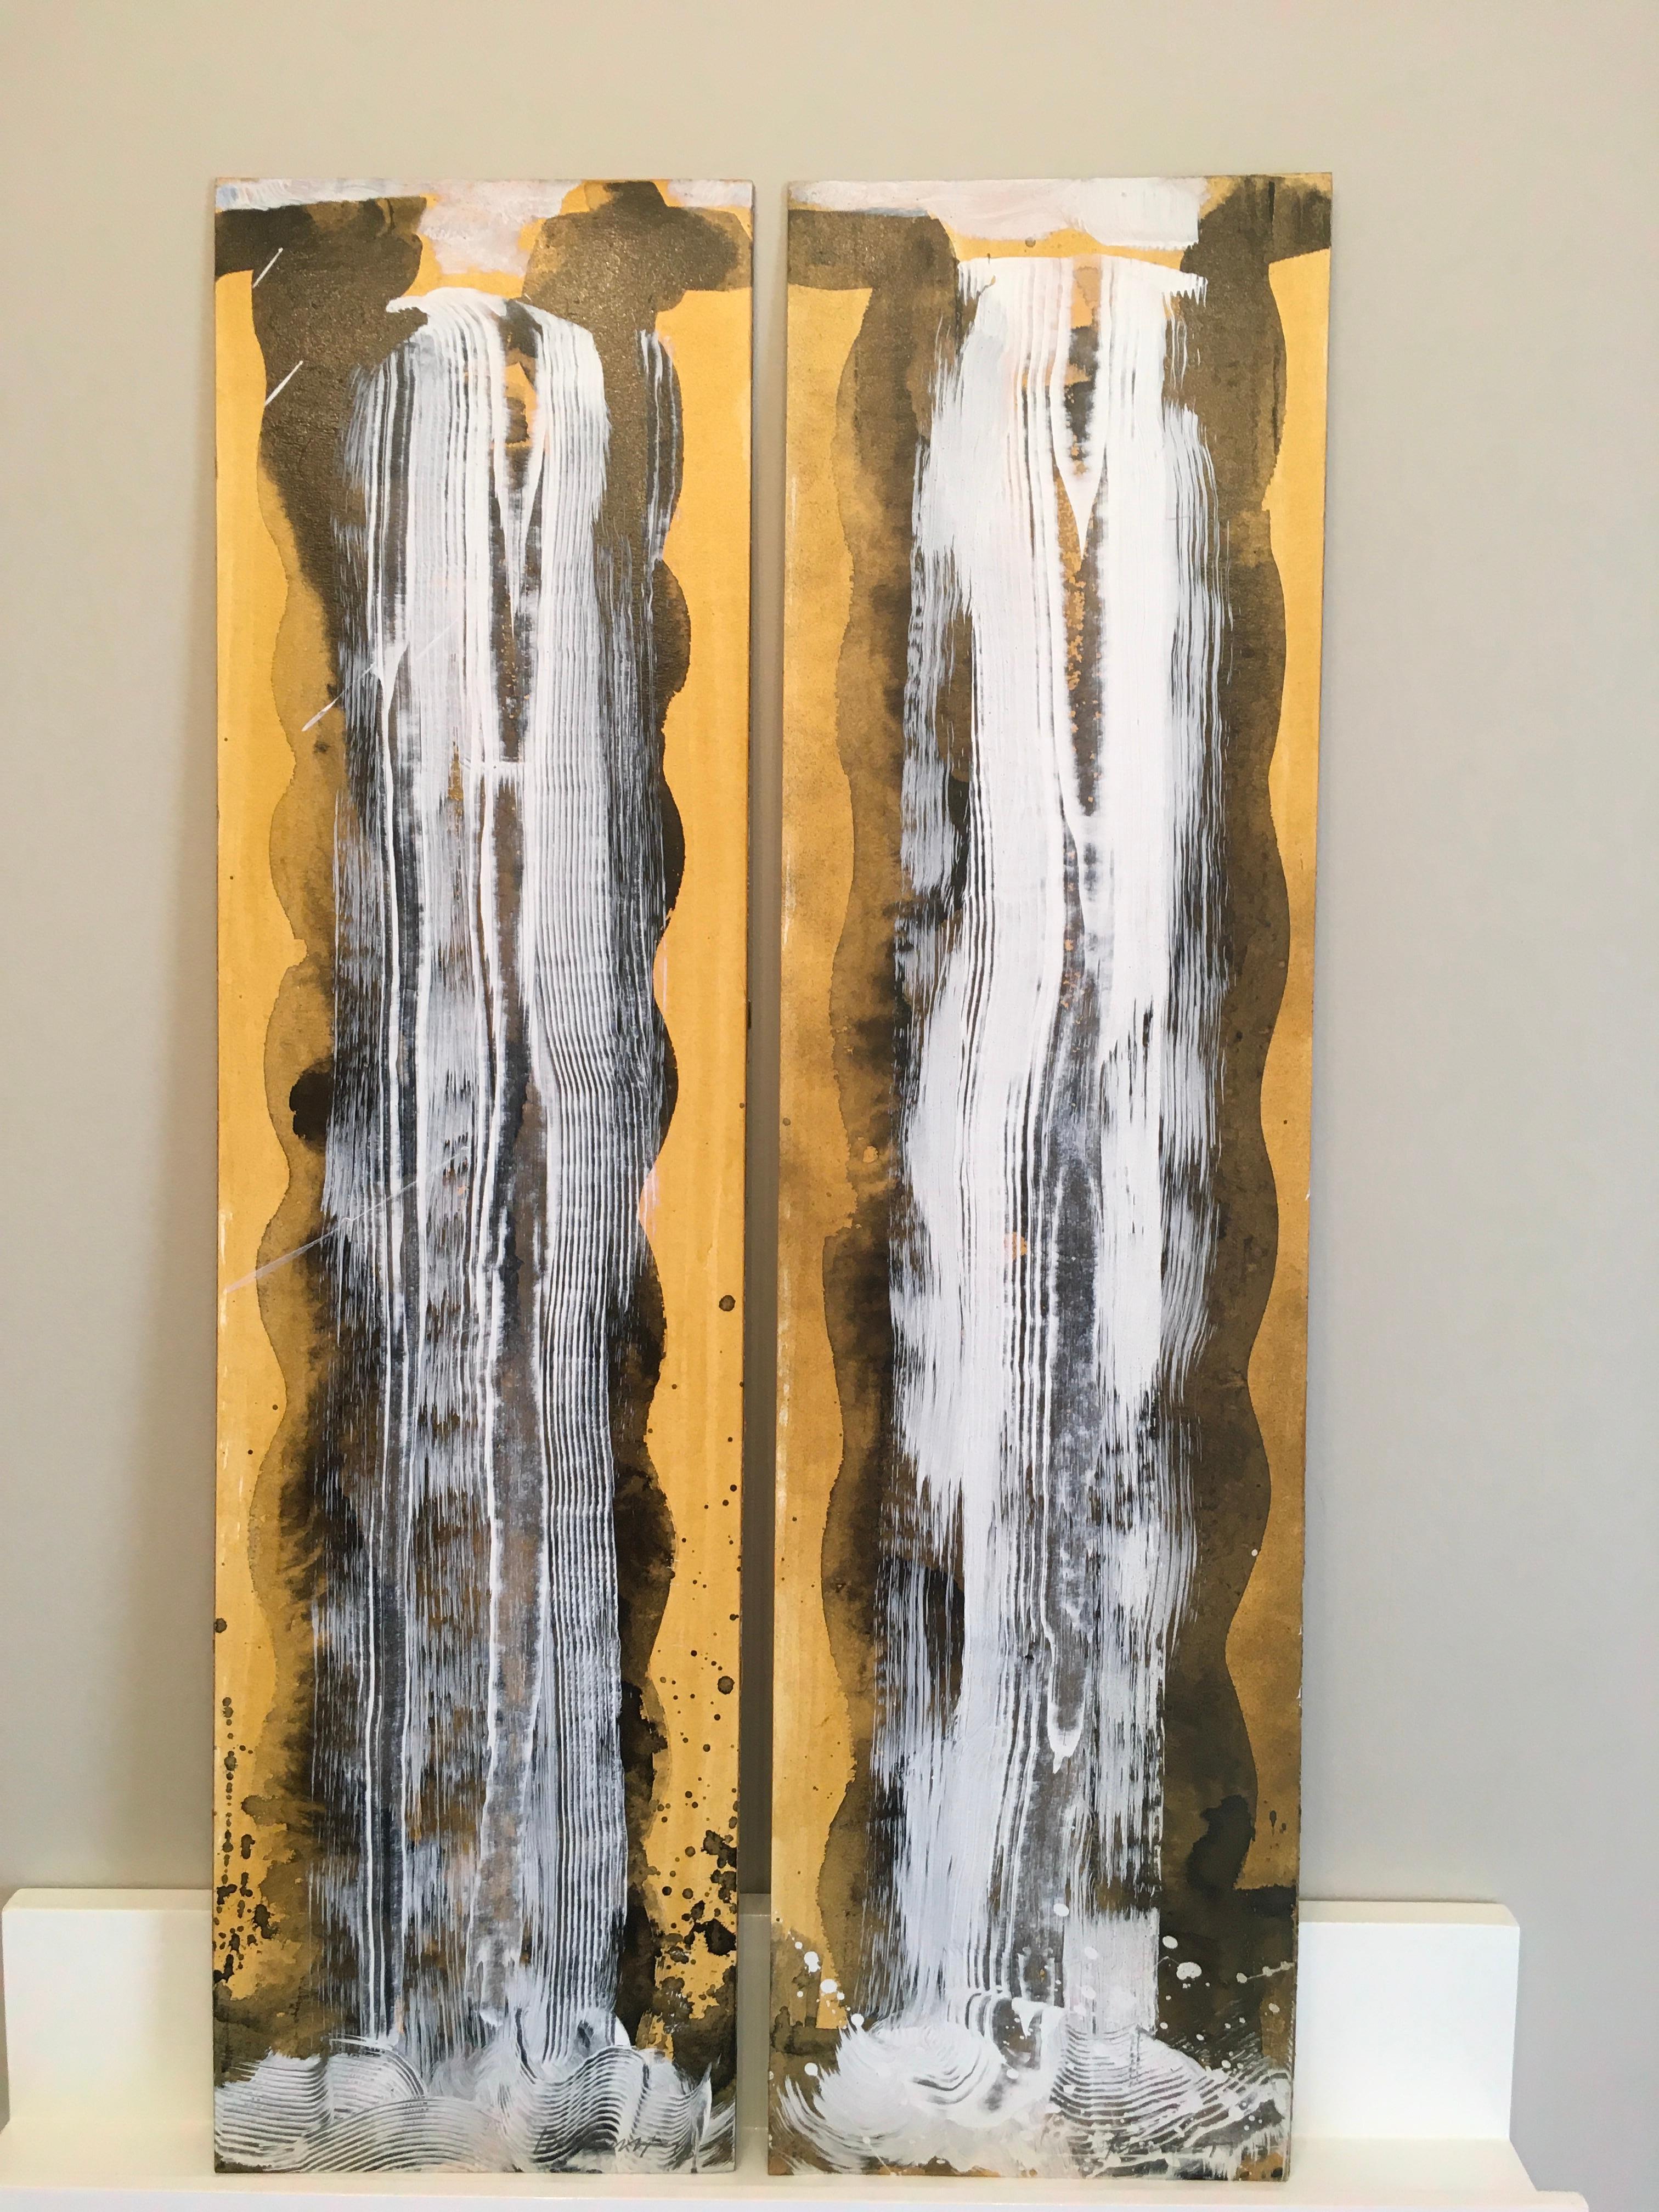 Waterfall Duet 1, Water, Gold, White, Flowing, Acrylic, Oil, Painting, unframed - Black Abstract Painting by Carol Bennett